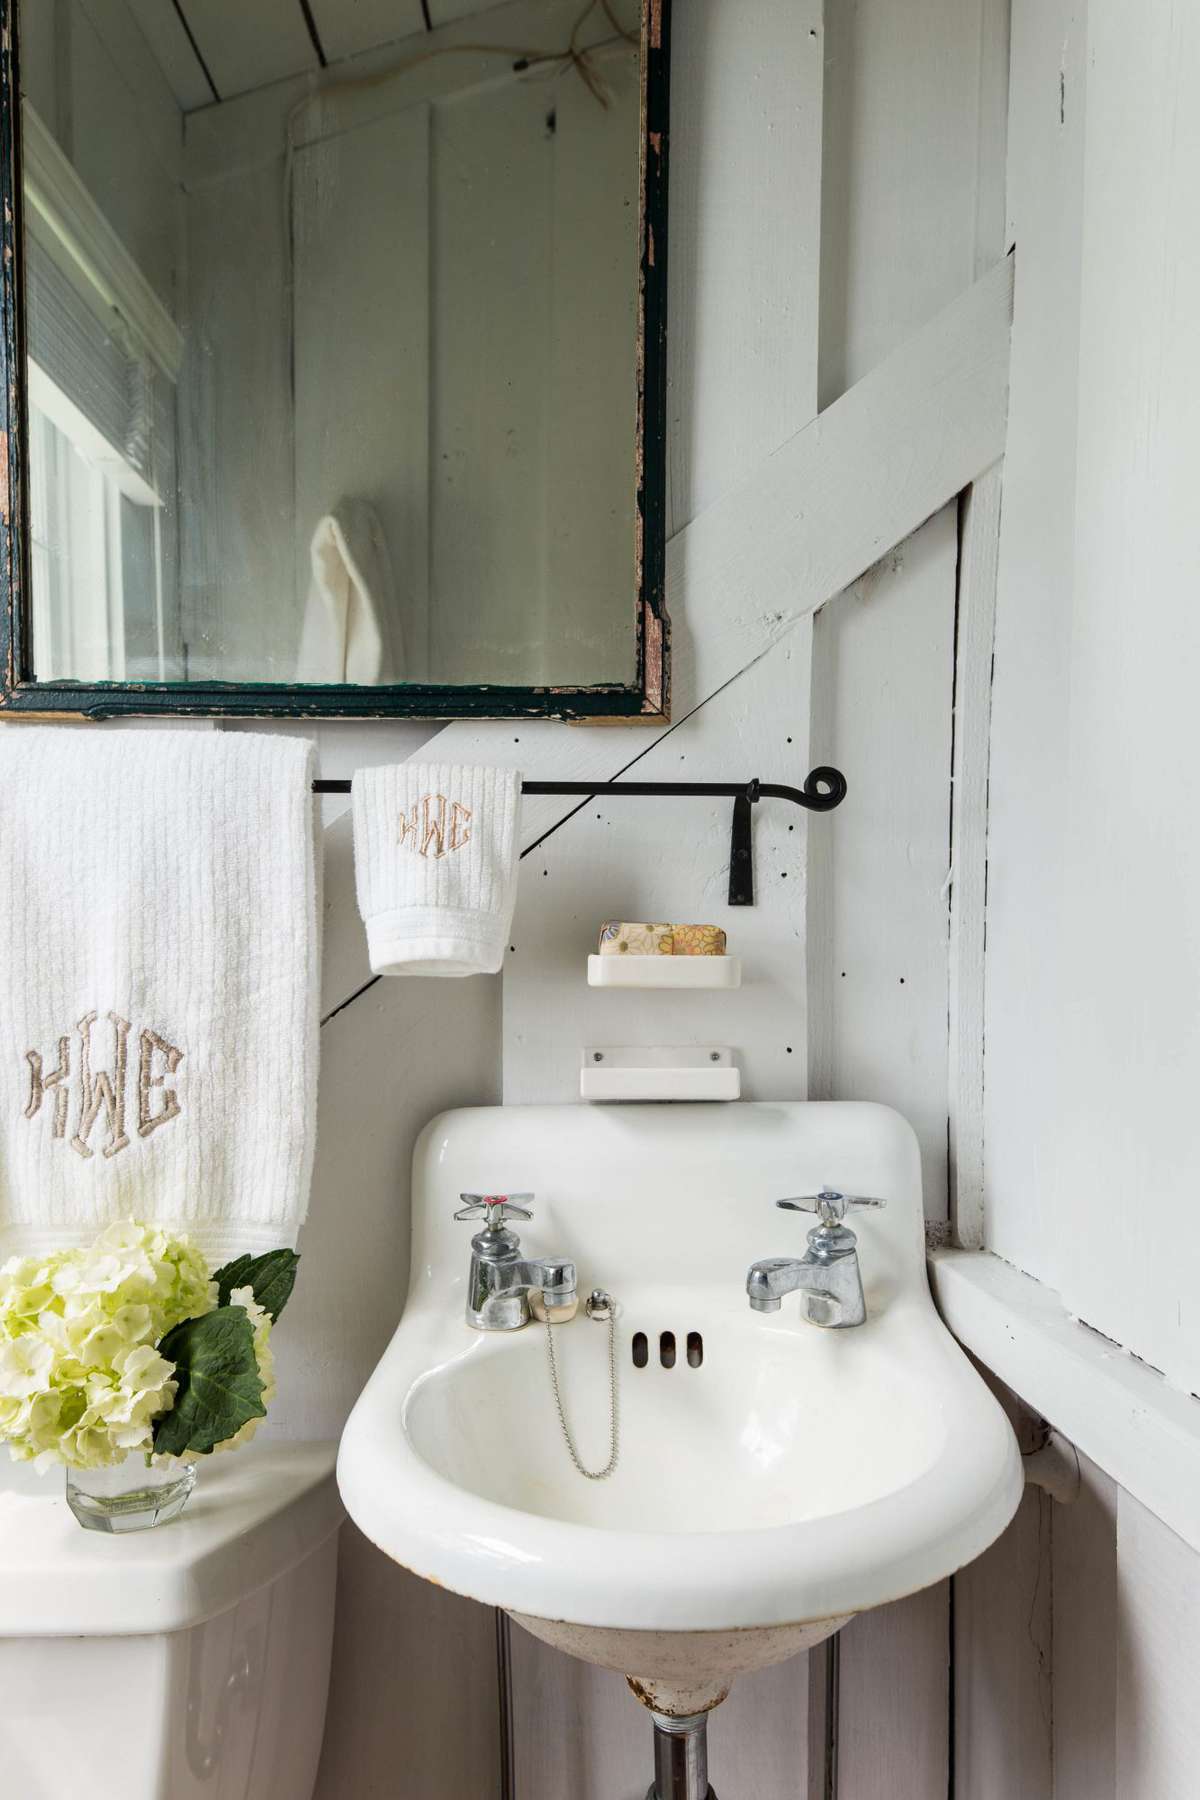 Small bathroom with white walls and old sink